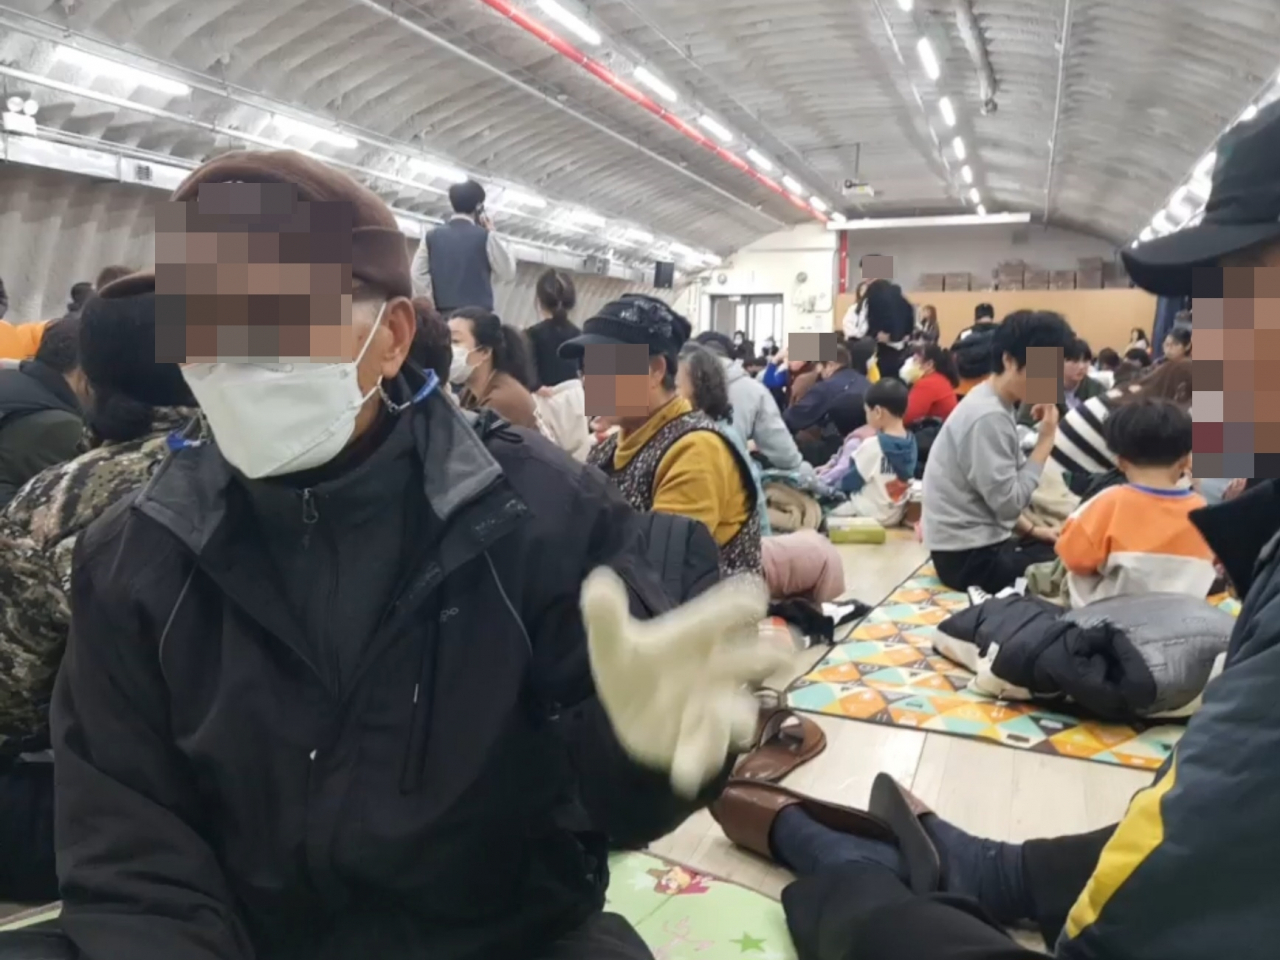 Residents of Yeonpyeong Island, Incheon, are seen in a shelter on Friday, after North Korea fired some 200 artillery shells into waters off its western coast in the morning. (Yonhap)